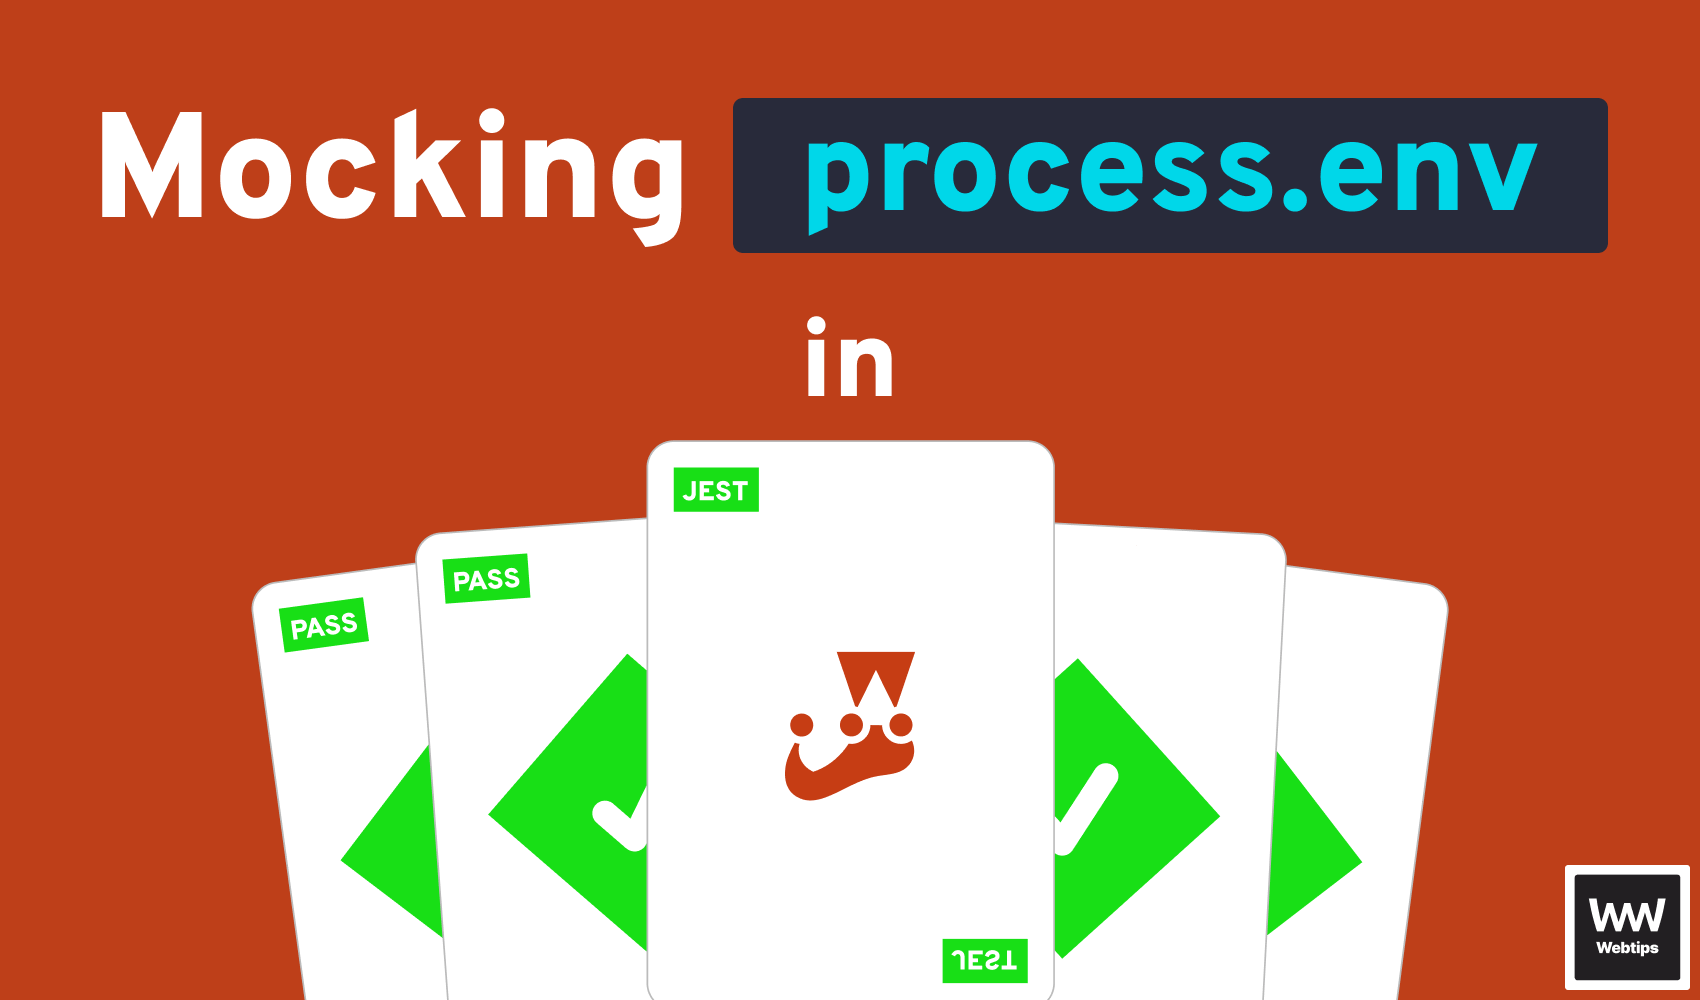 How to Mock process.env in Jest